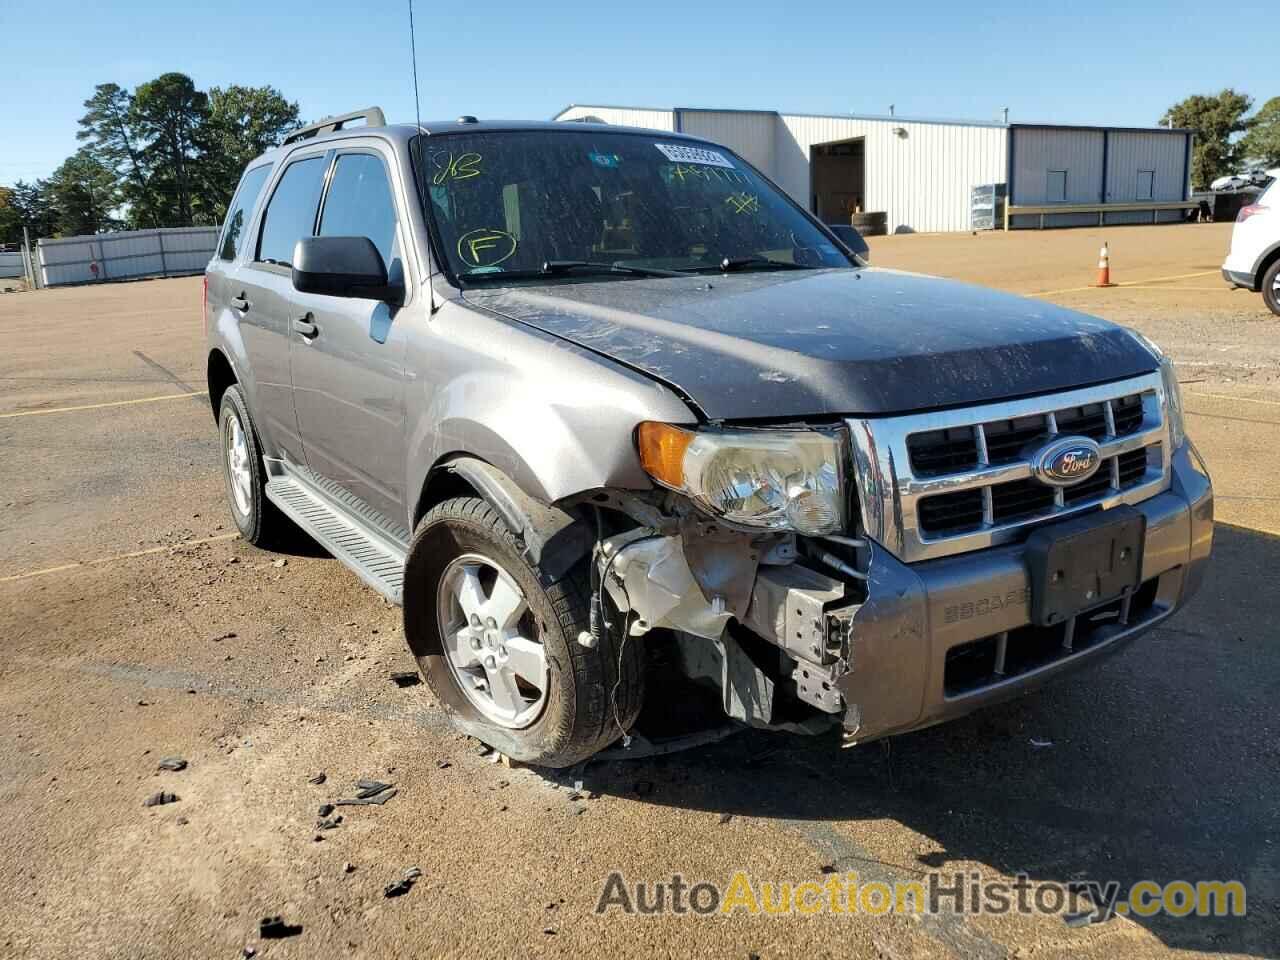 2012 FORD ESCAPE XLT, 1FMCU0D79CKA57777